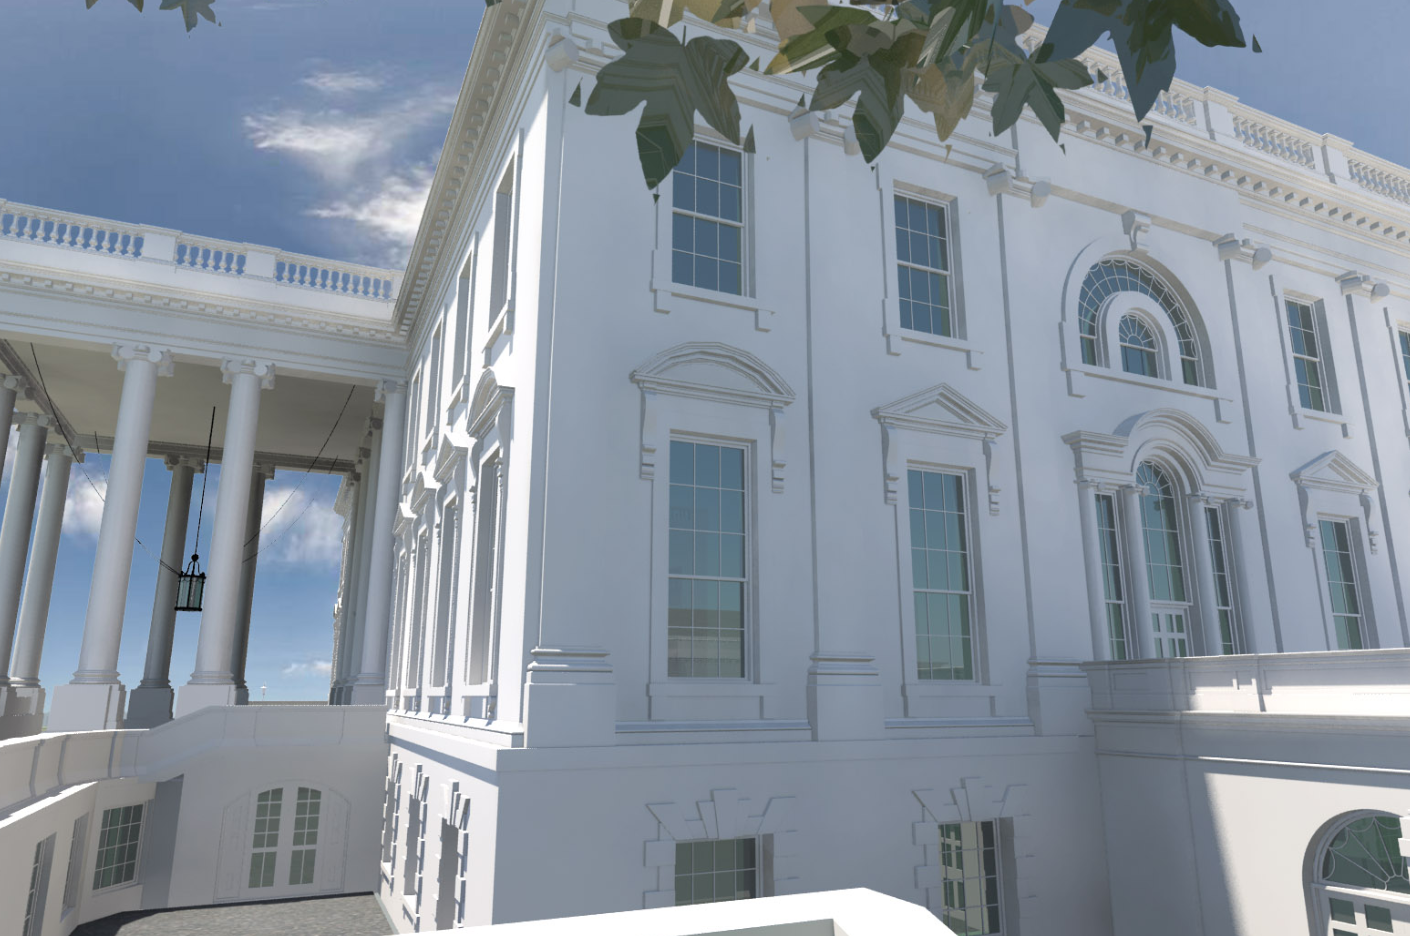 Stantec The Building Information Model (BIM) of the White House in Washington DC.